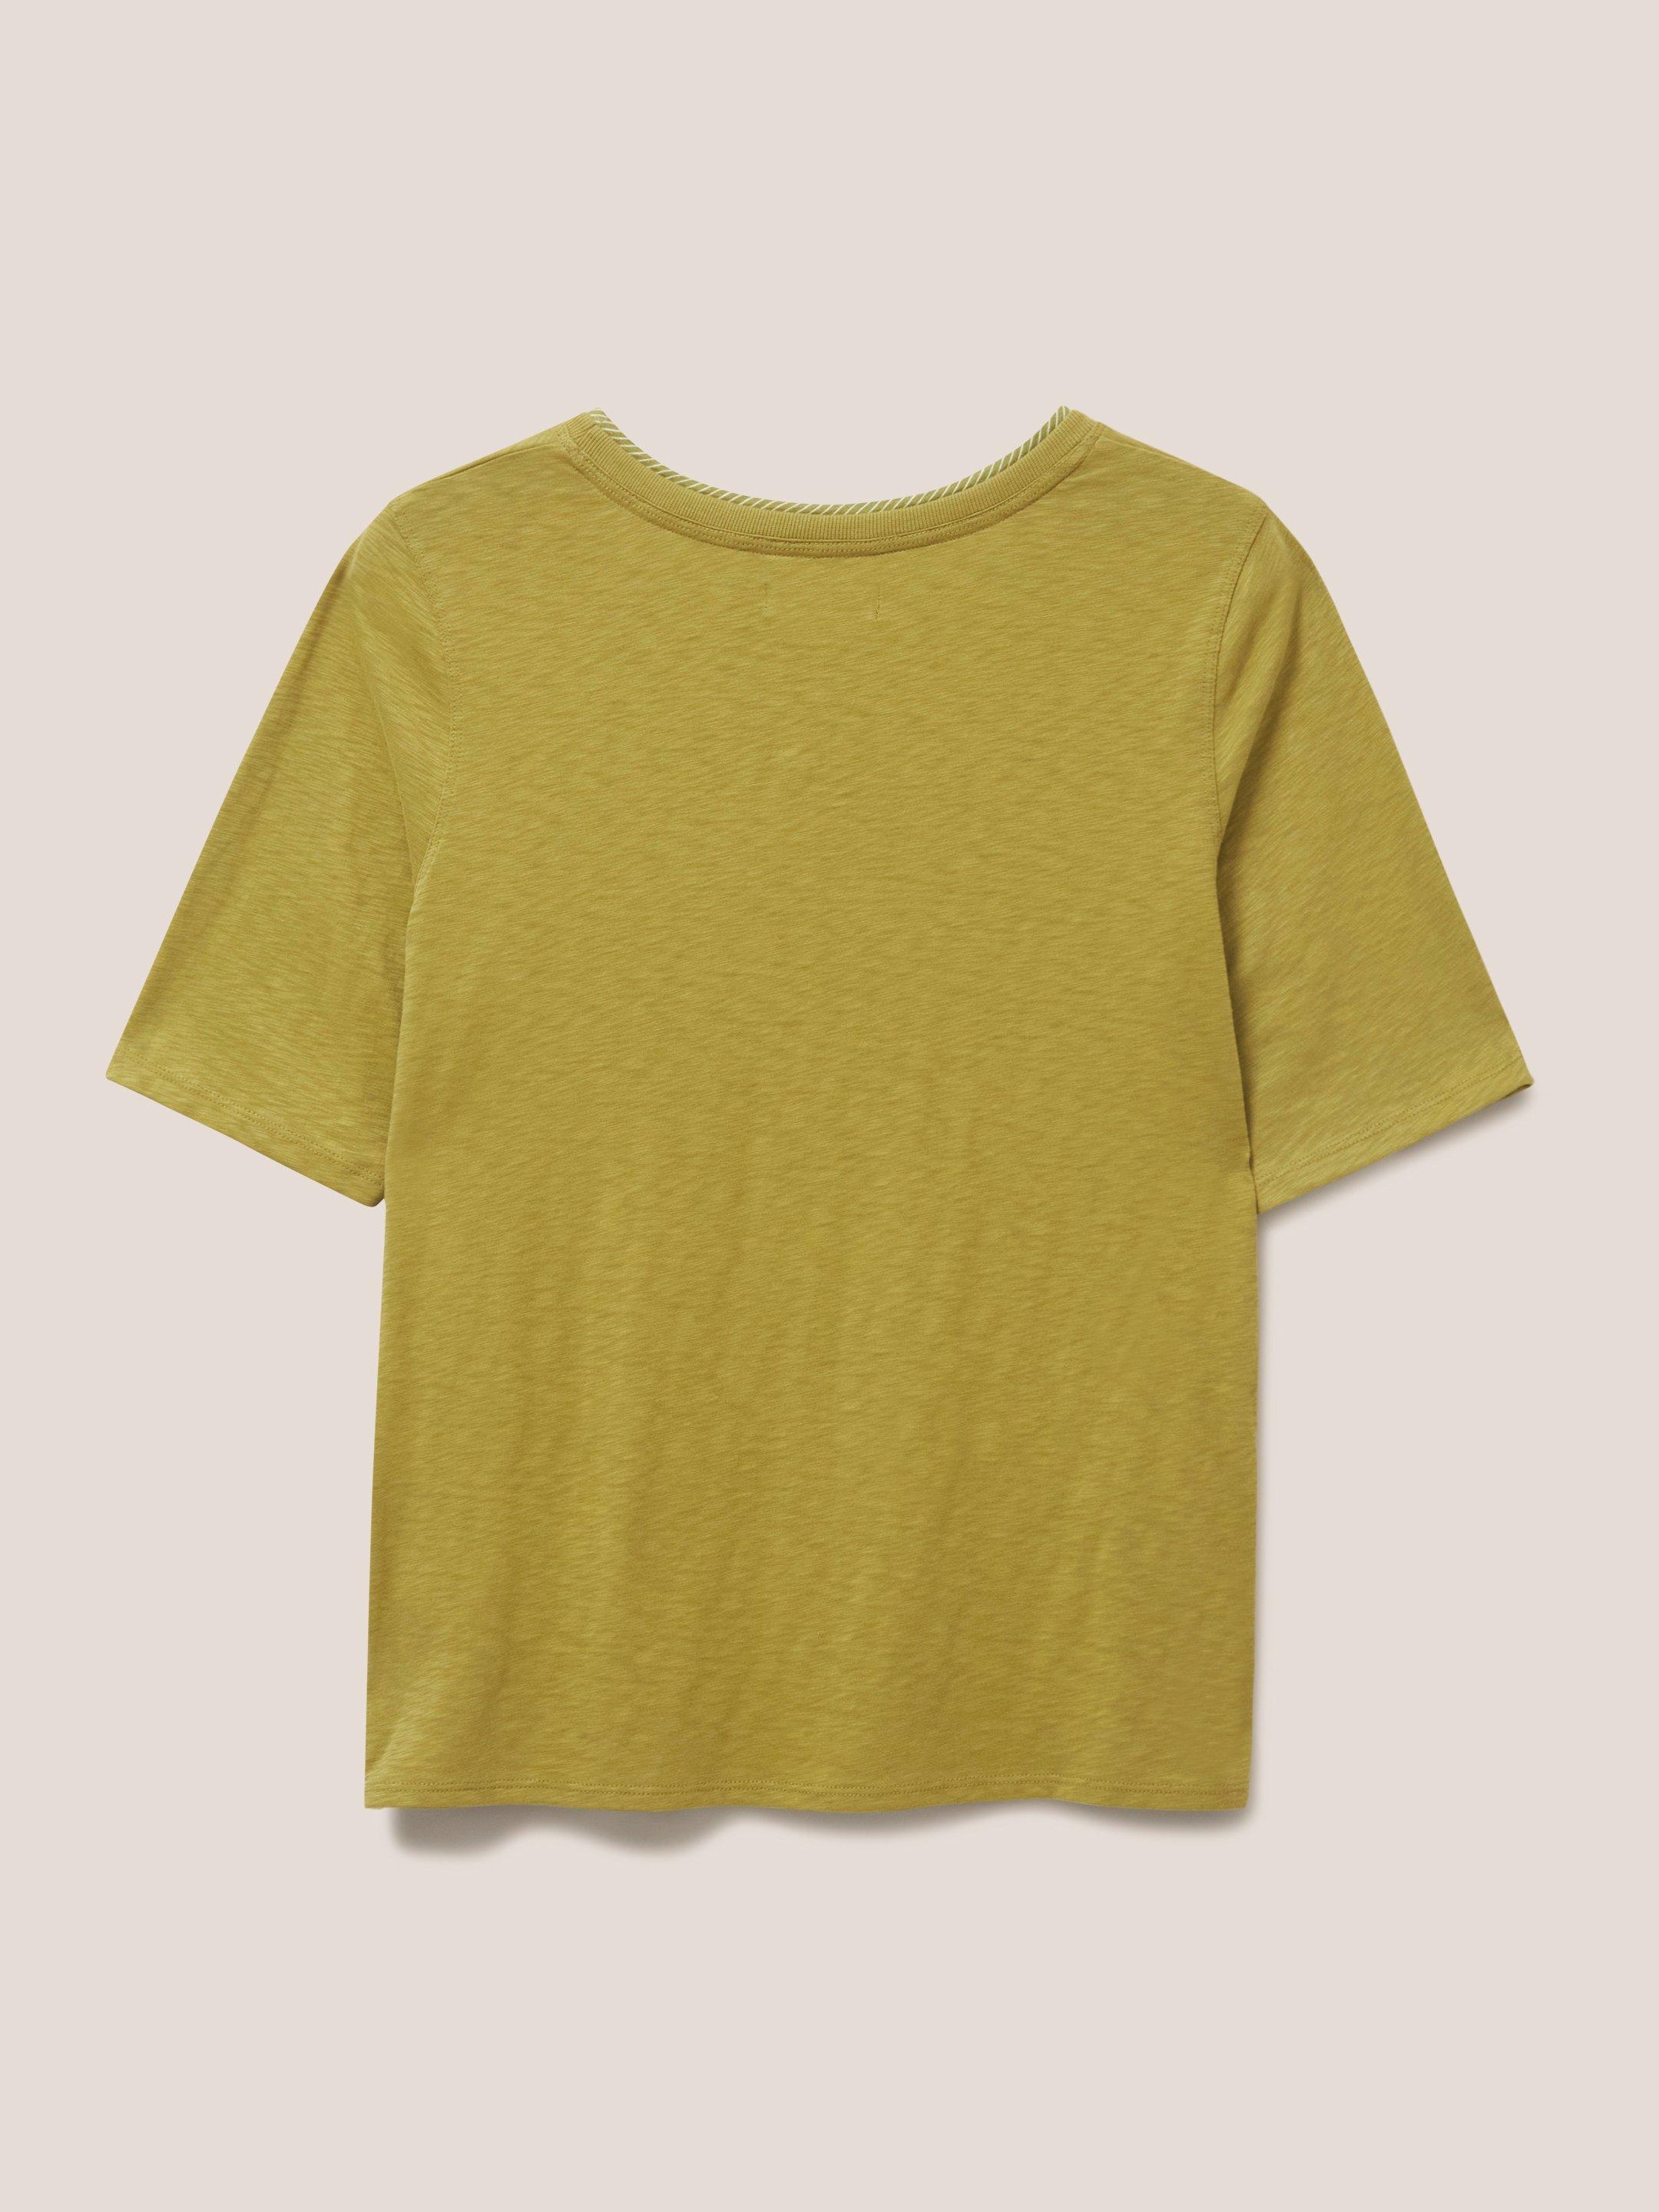 Annabel Fairtrade Cotton Tee in MID GREEN - FLAT BACK